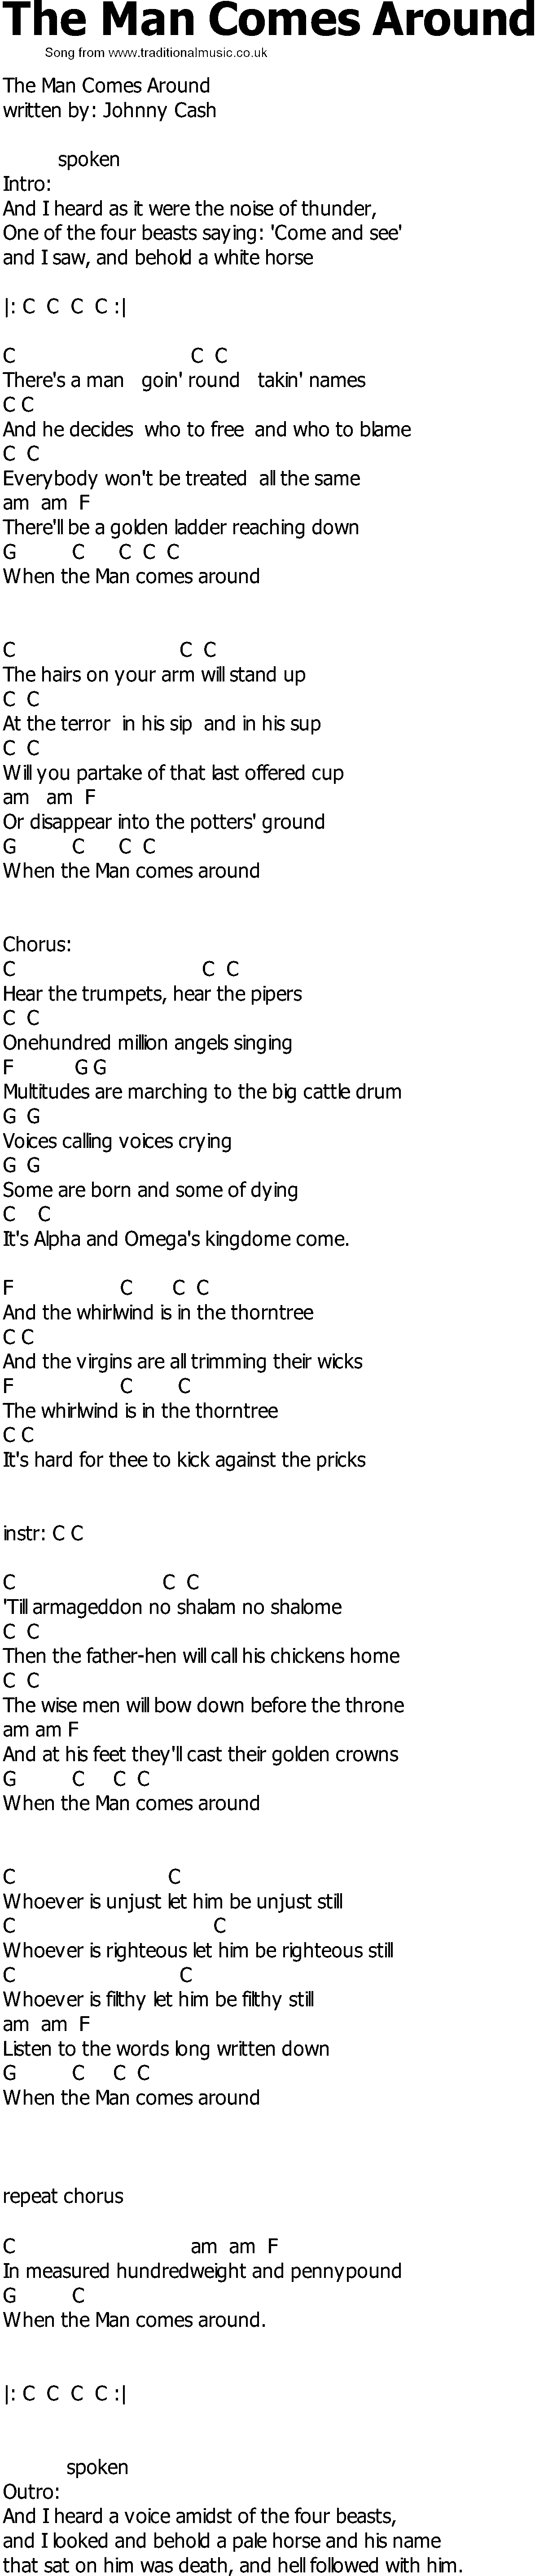 Old Country song lyrics with chords - The Man Comes Around